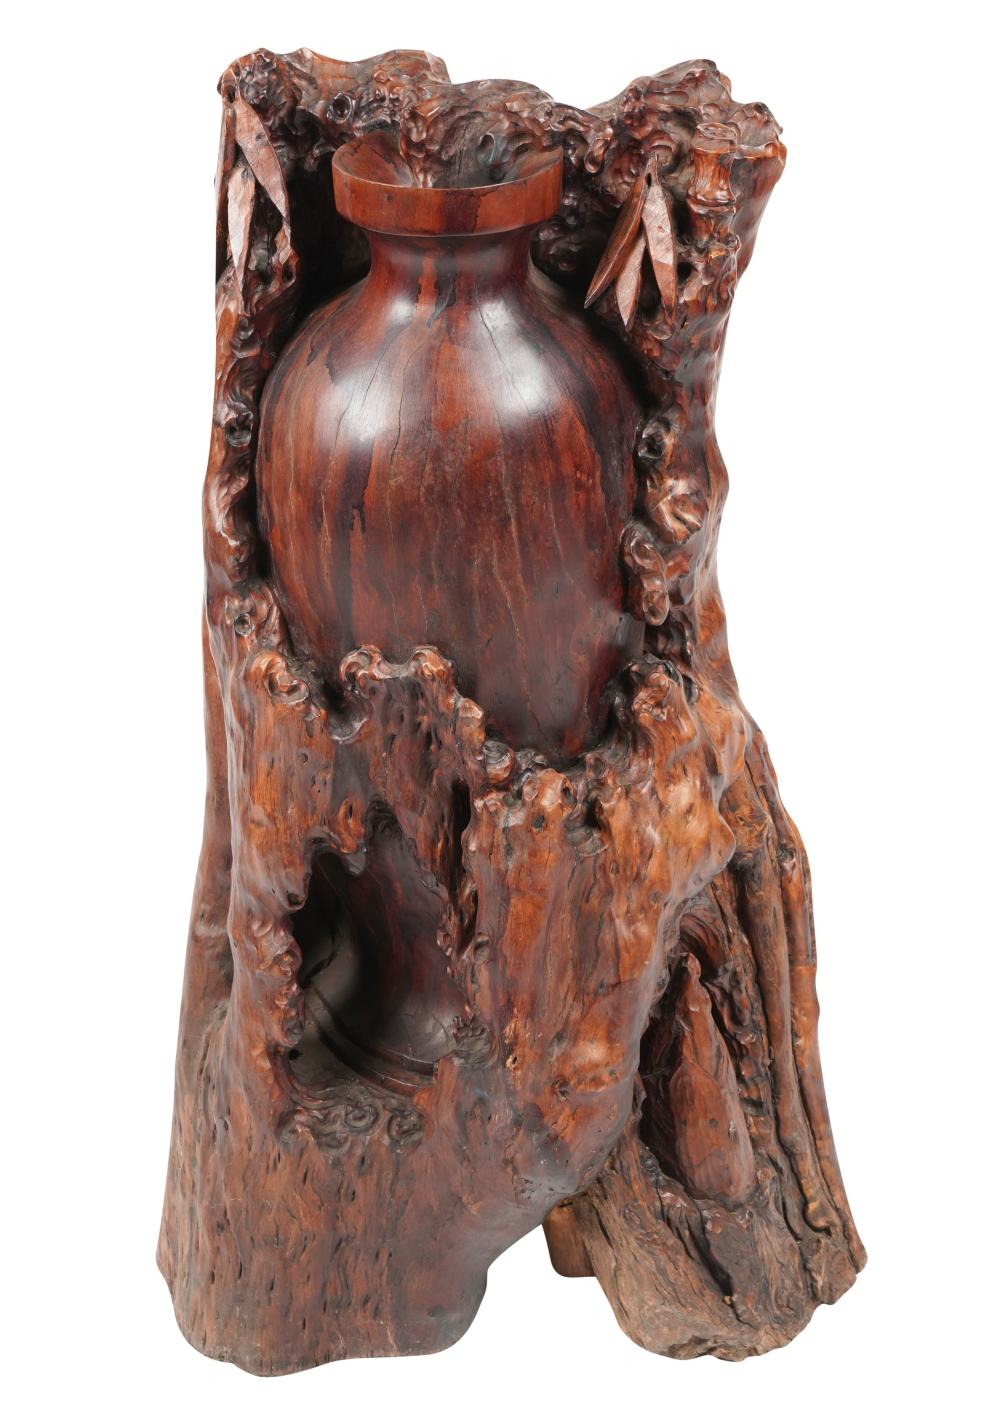 CHINESE ROSEWOOD CARVINGChinese